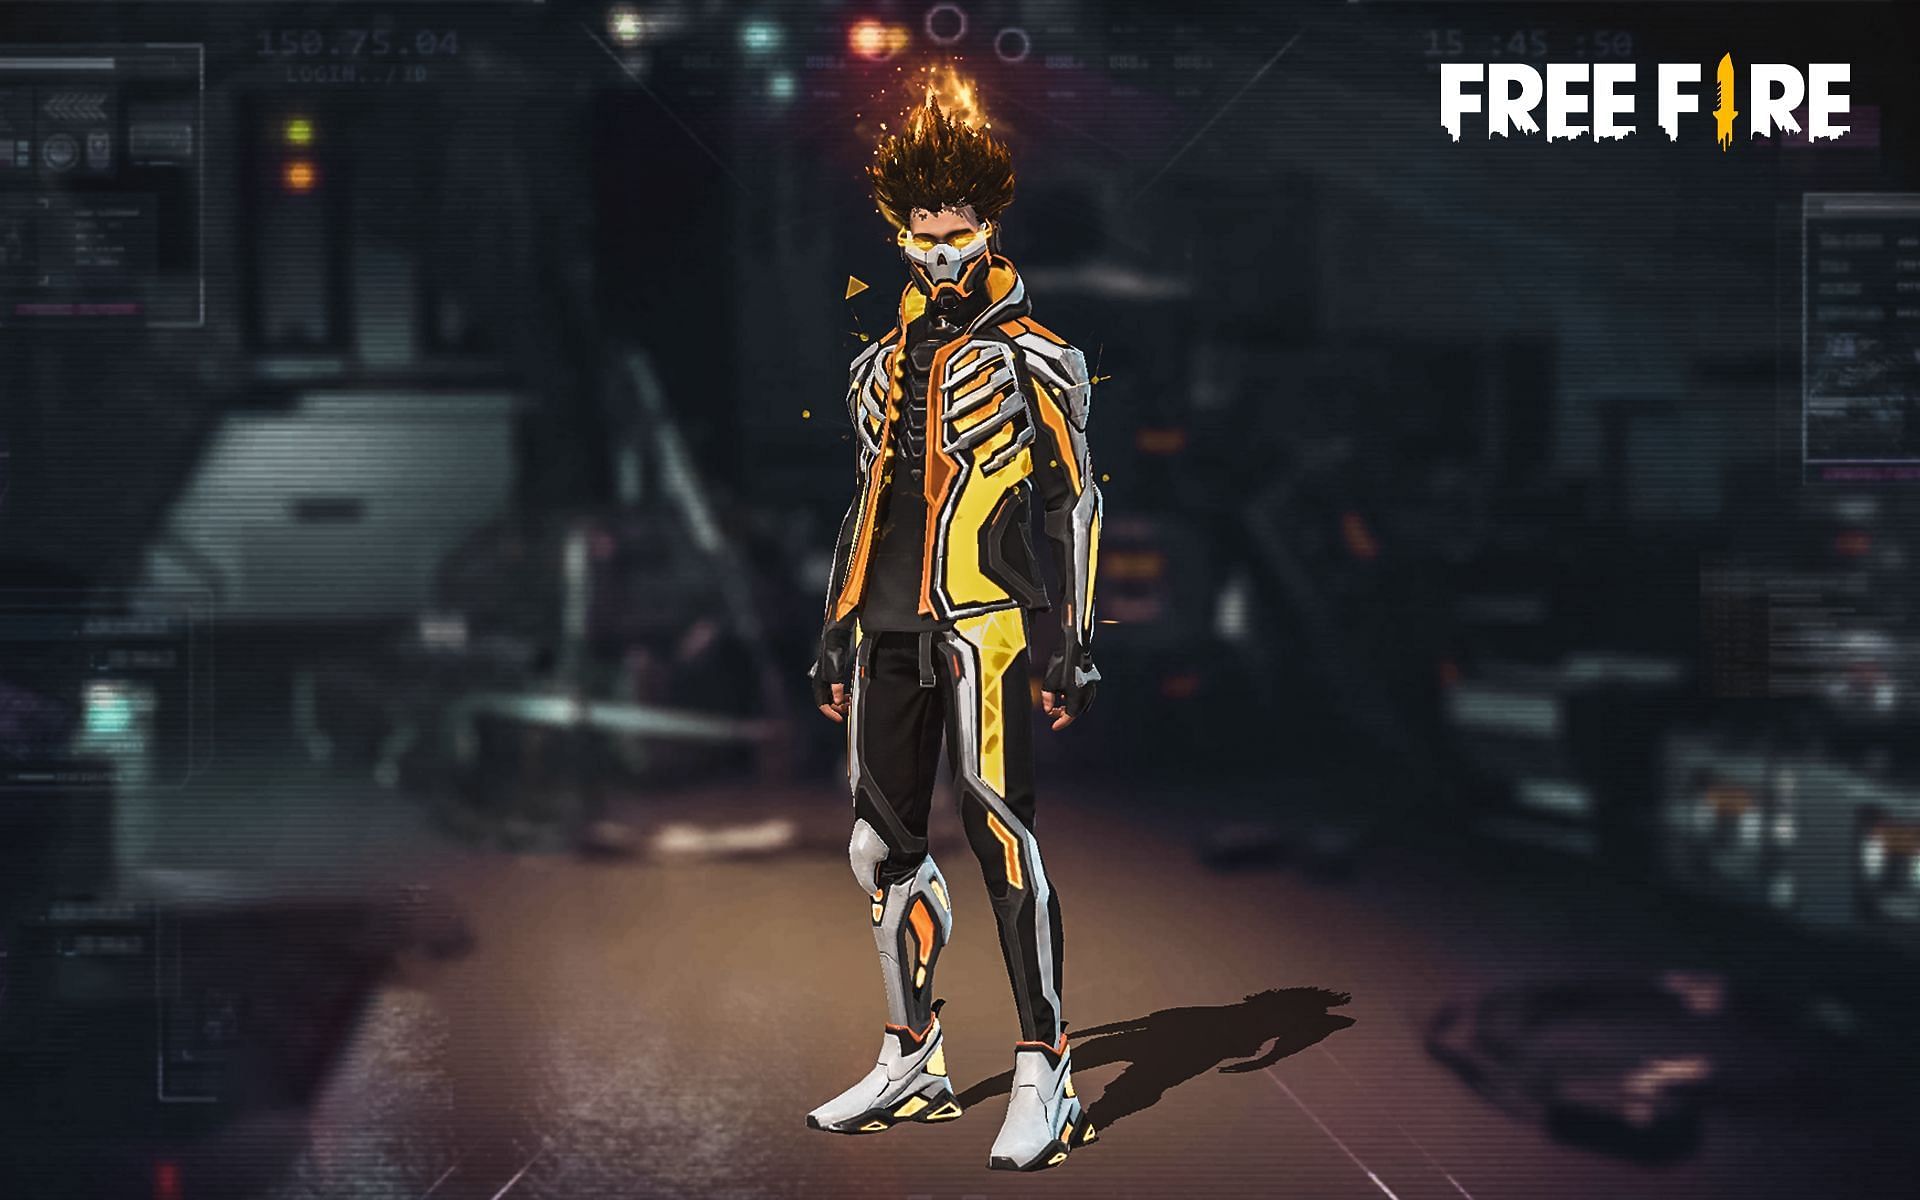 Free Fire news: Booyah Ascension reveals new legendary outfits